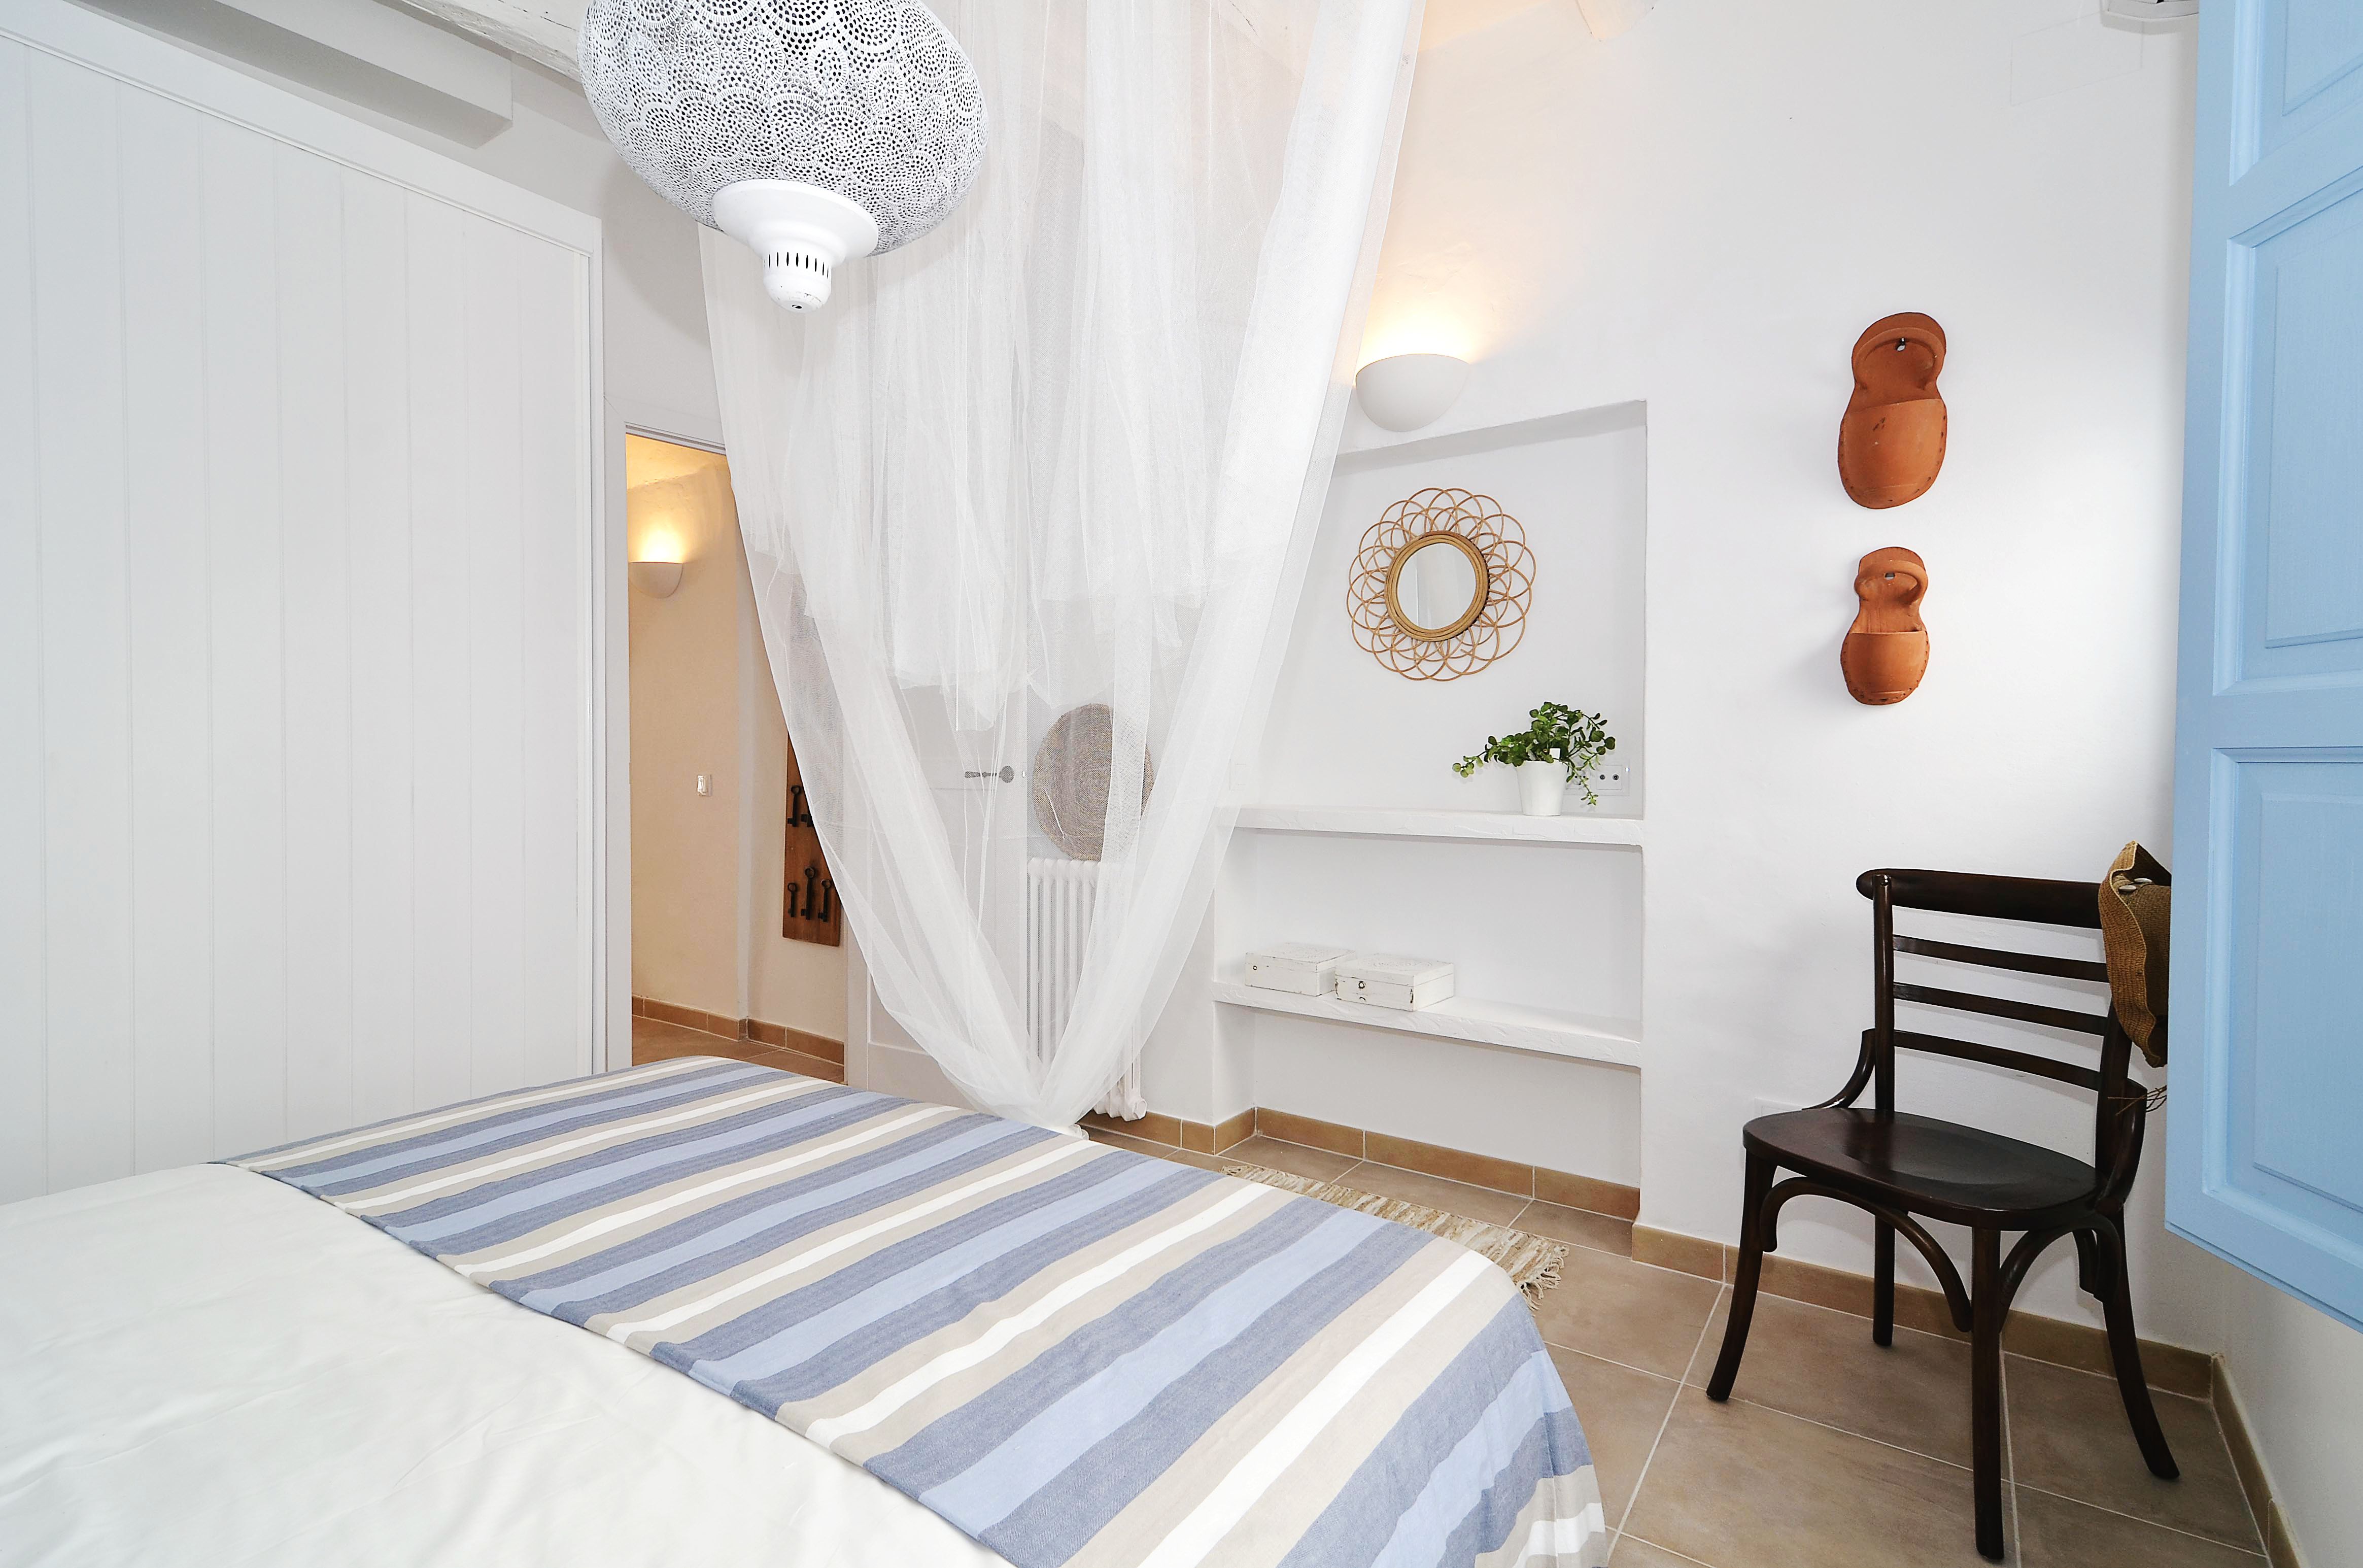 House tour: old fisherman's house in Sitges: master bedroom